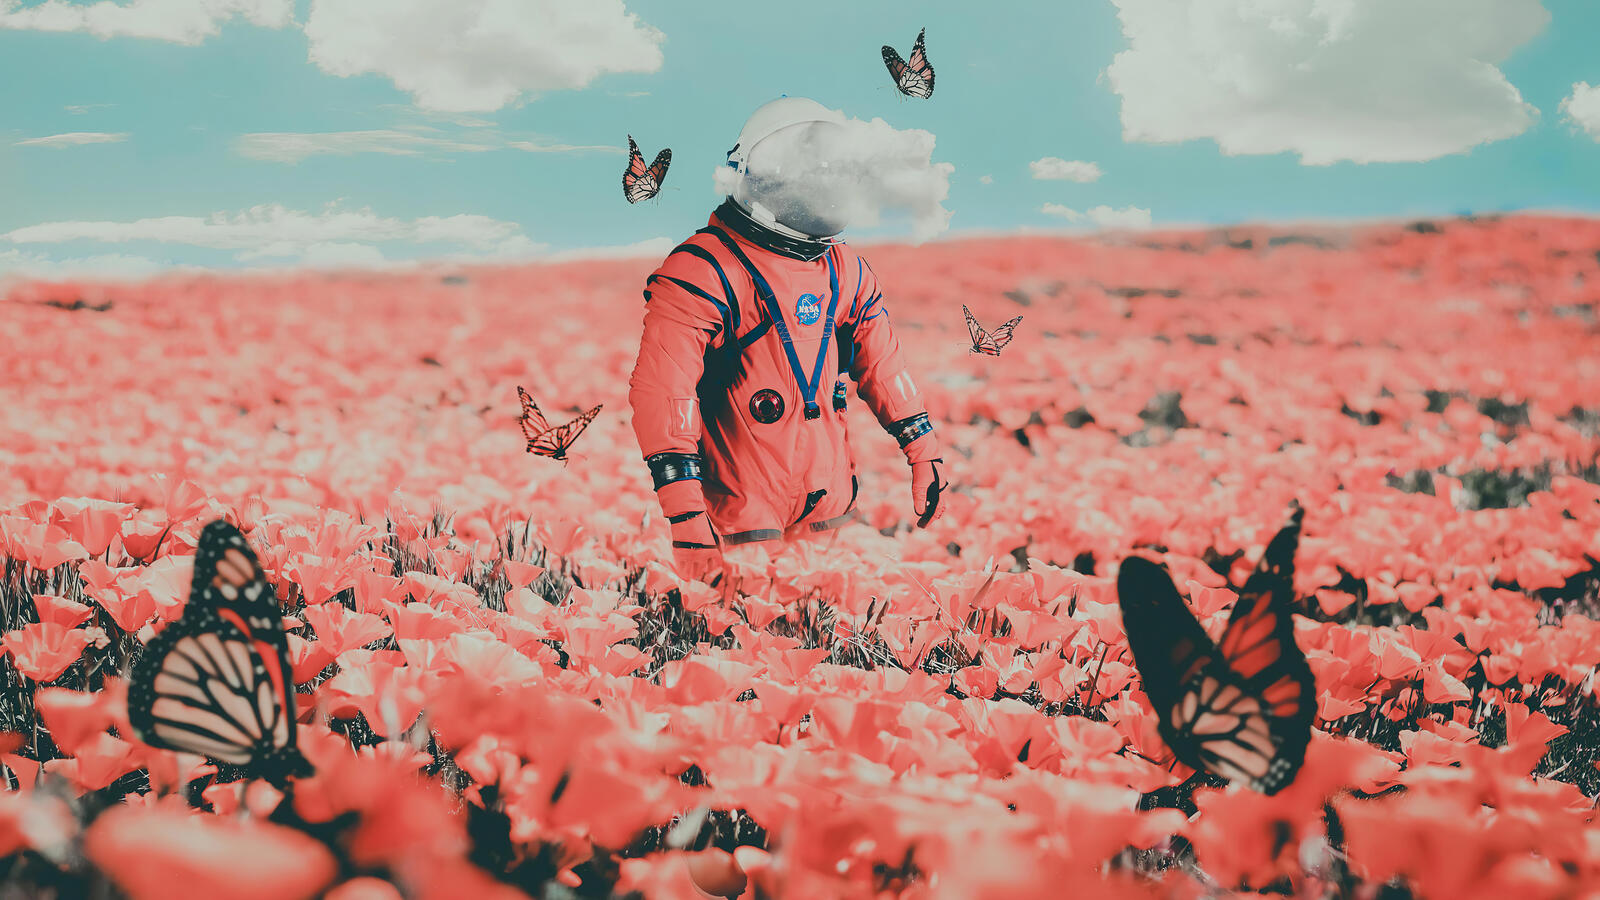 Free photo Astronaut on the field with pink flowers and butterflies